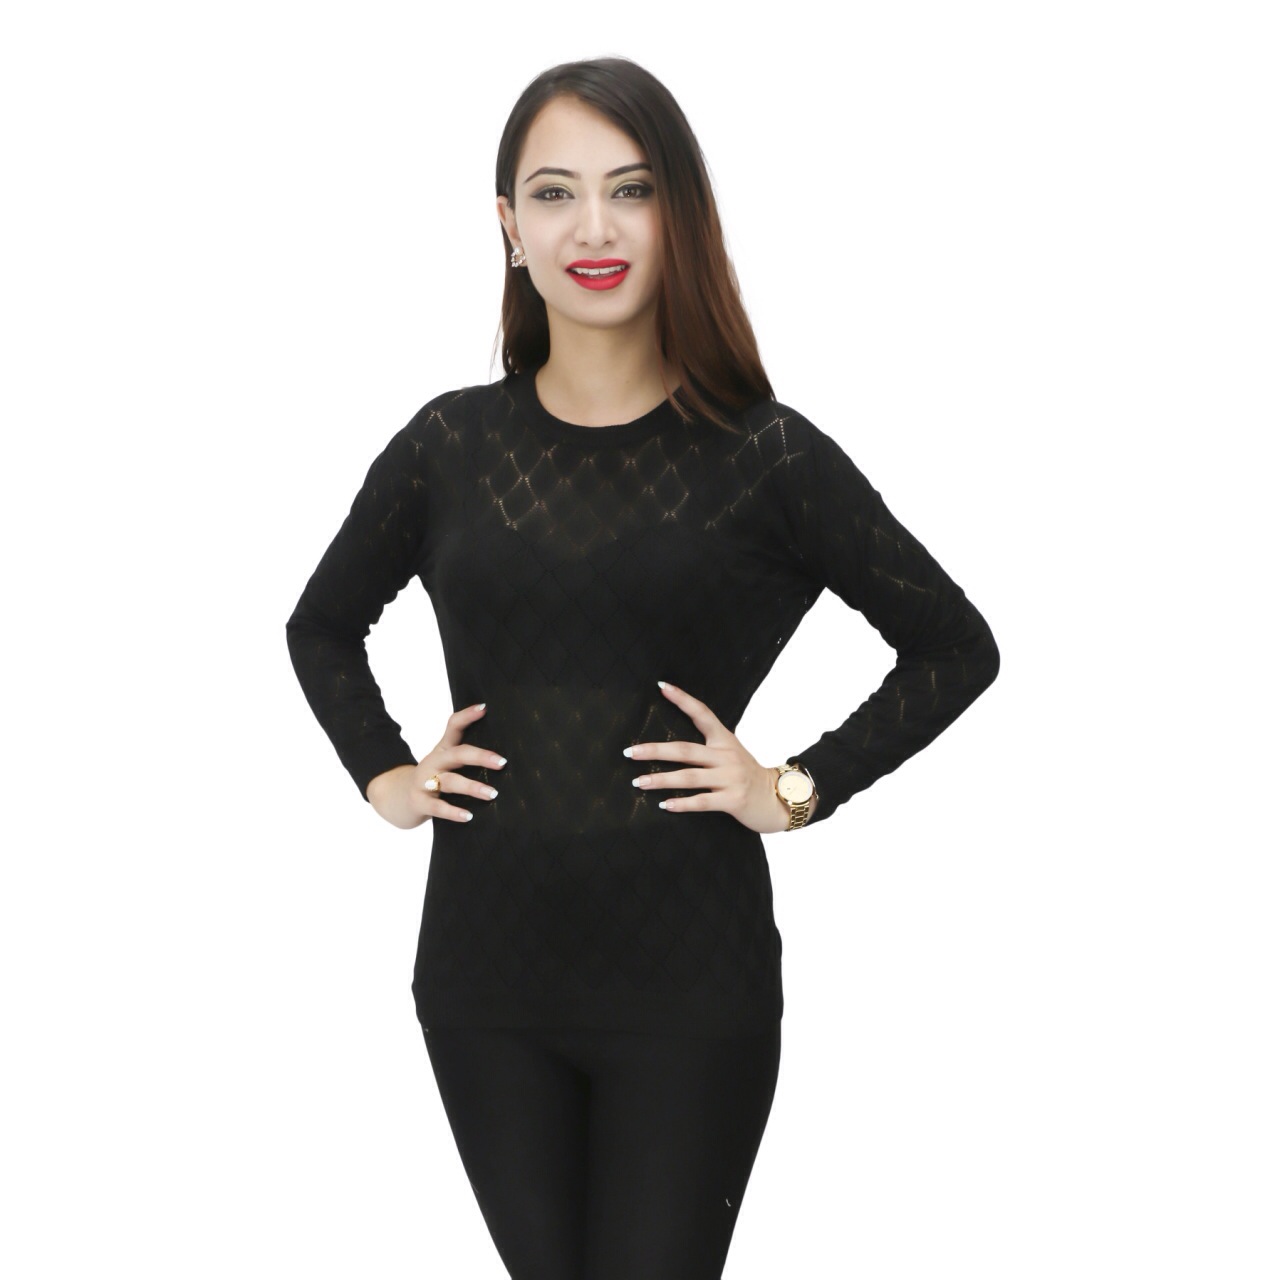 Black Knit Bamboo Fabric Full Sleeves Sheer Top For Women 